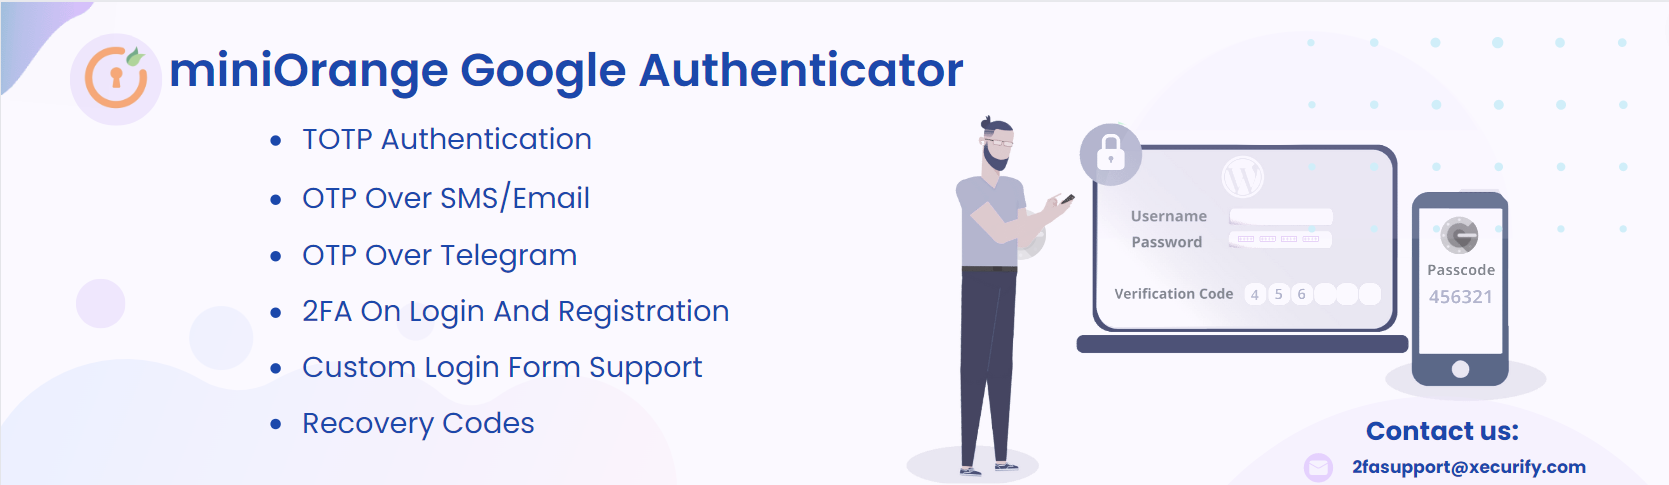 miniOrange's Google Authenticator – WordPress Two Factor Authentication (2FA , Two Factor, OTP SMS and Email) | Passwordless login